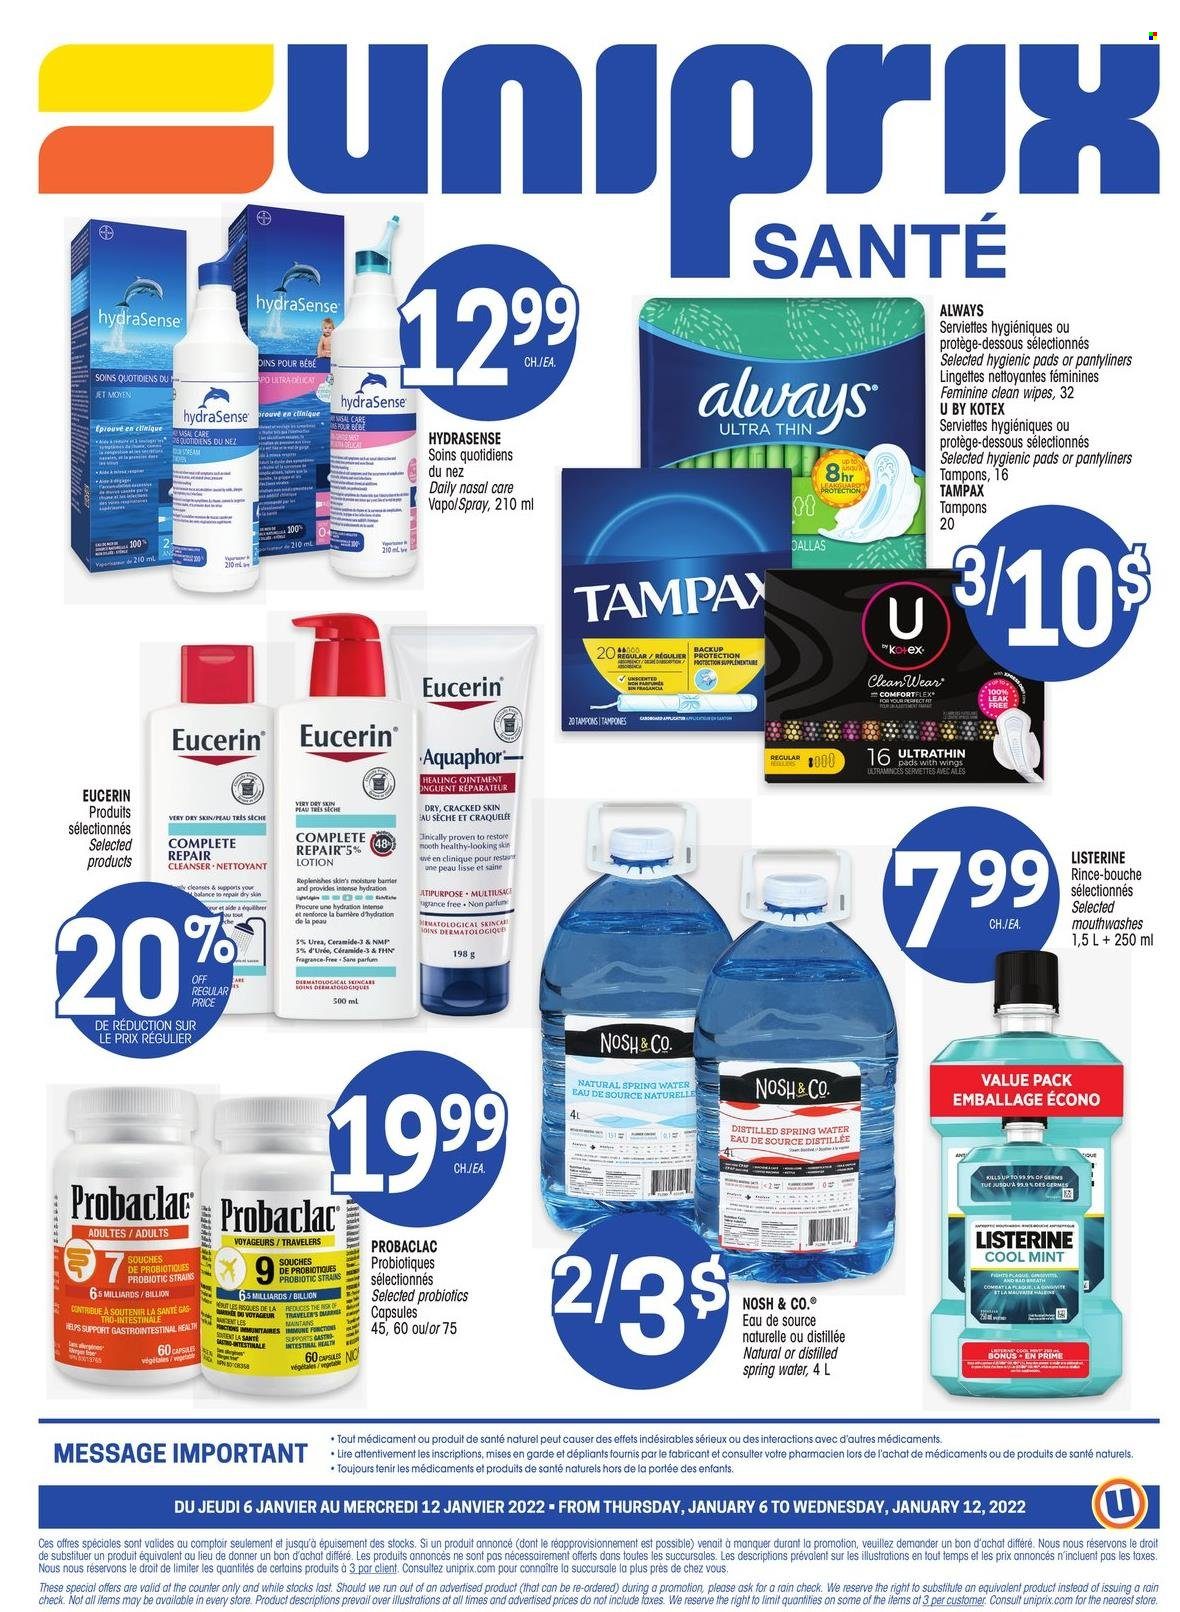 thumbnail - Uniprix Santé Flyer - January 06, 2022 - January 12, 2022 - Sales products - spring water, wipes, Aquaphor, ointment, Jet, pantyliners, tampons, cleanser, Clinique, body lotion, fragrance, probiotics, Eucerin, Listerine, Tampax. Page 4.